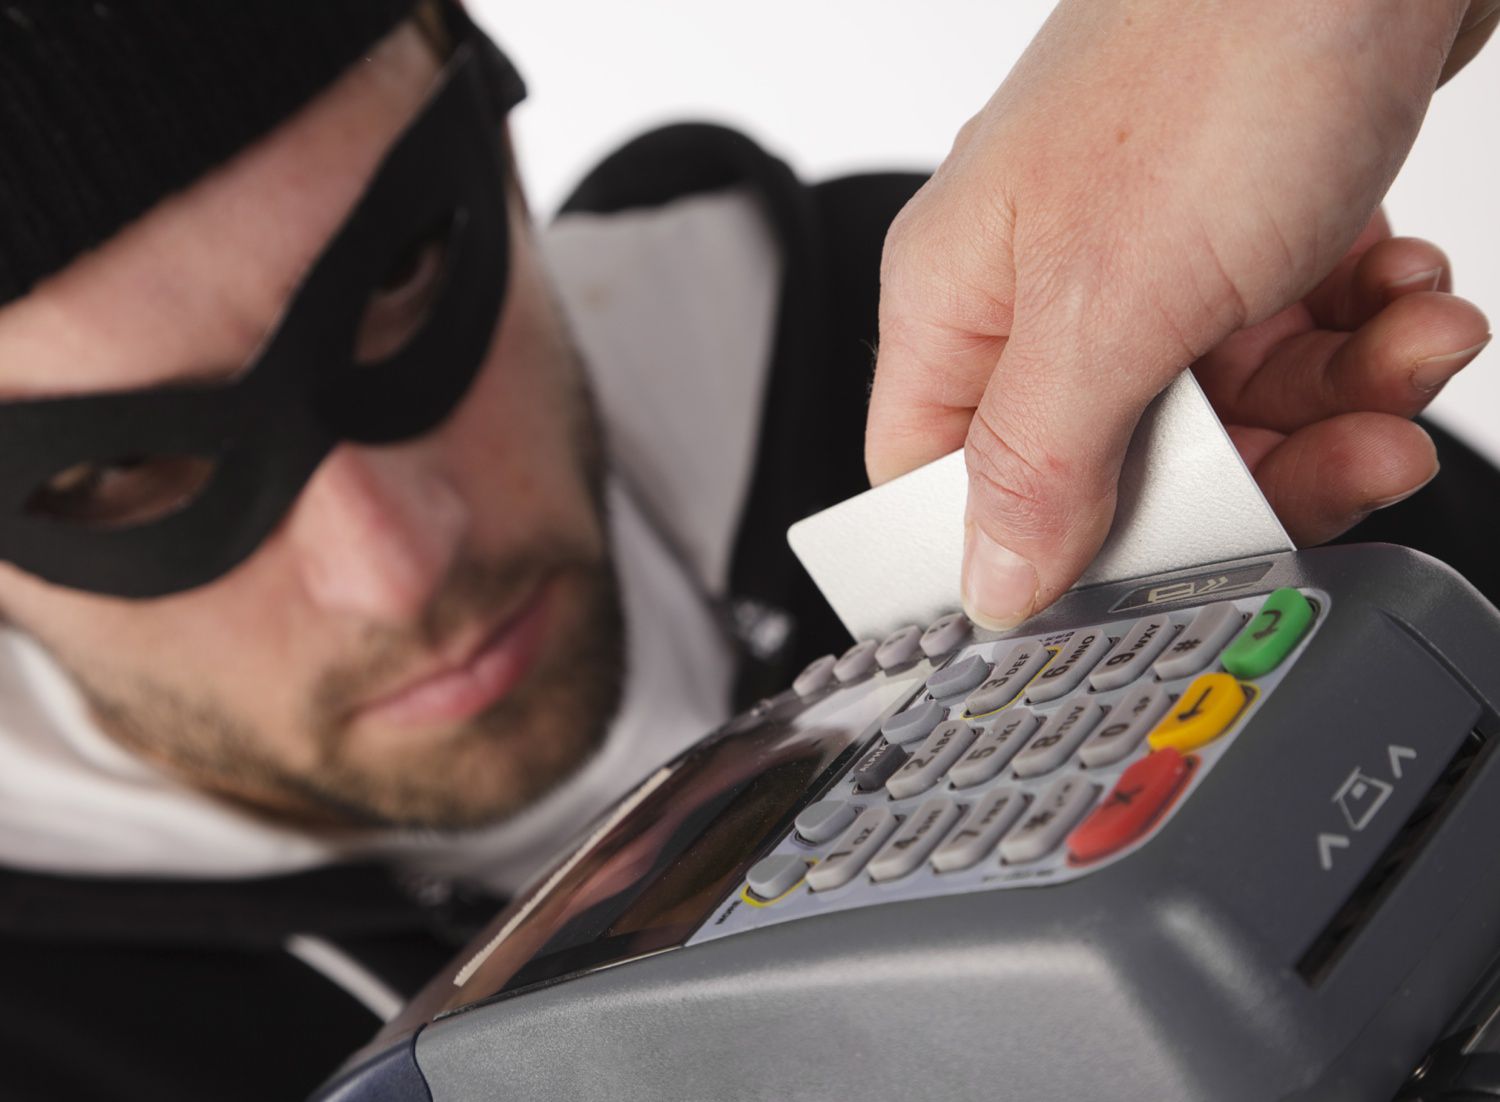 6 Steps to Dealing with Unauthorized Transactions